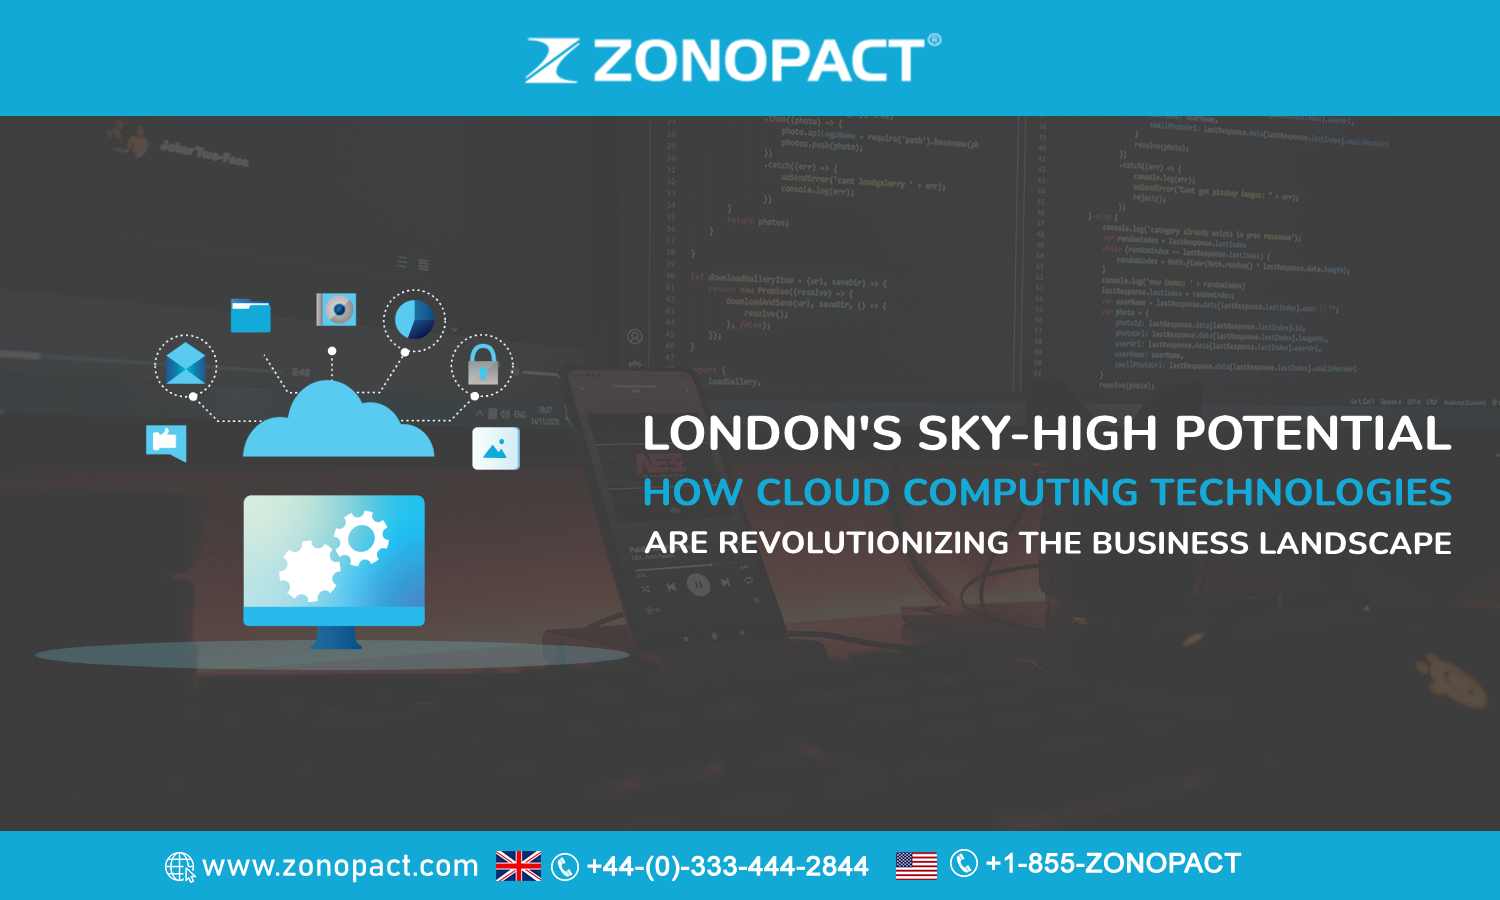 London's Sky-High Potential How Cloud Computing Technologies are Revolutionizing the Business Landscape